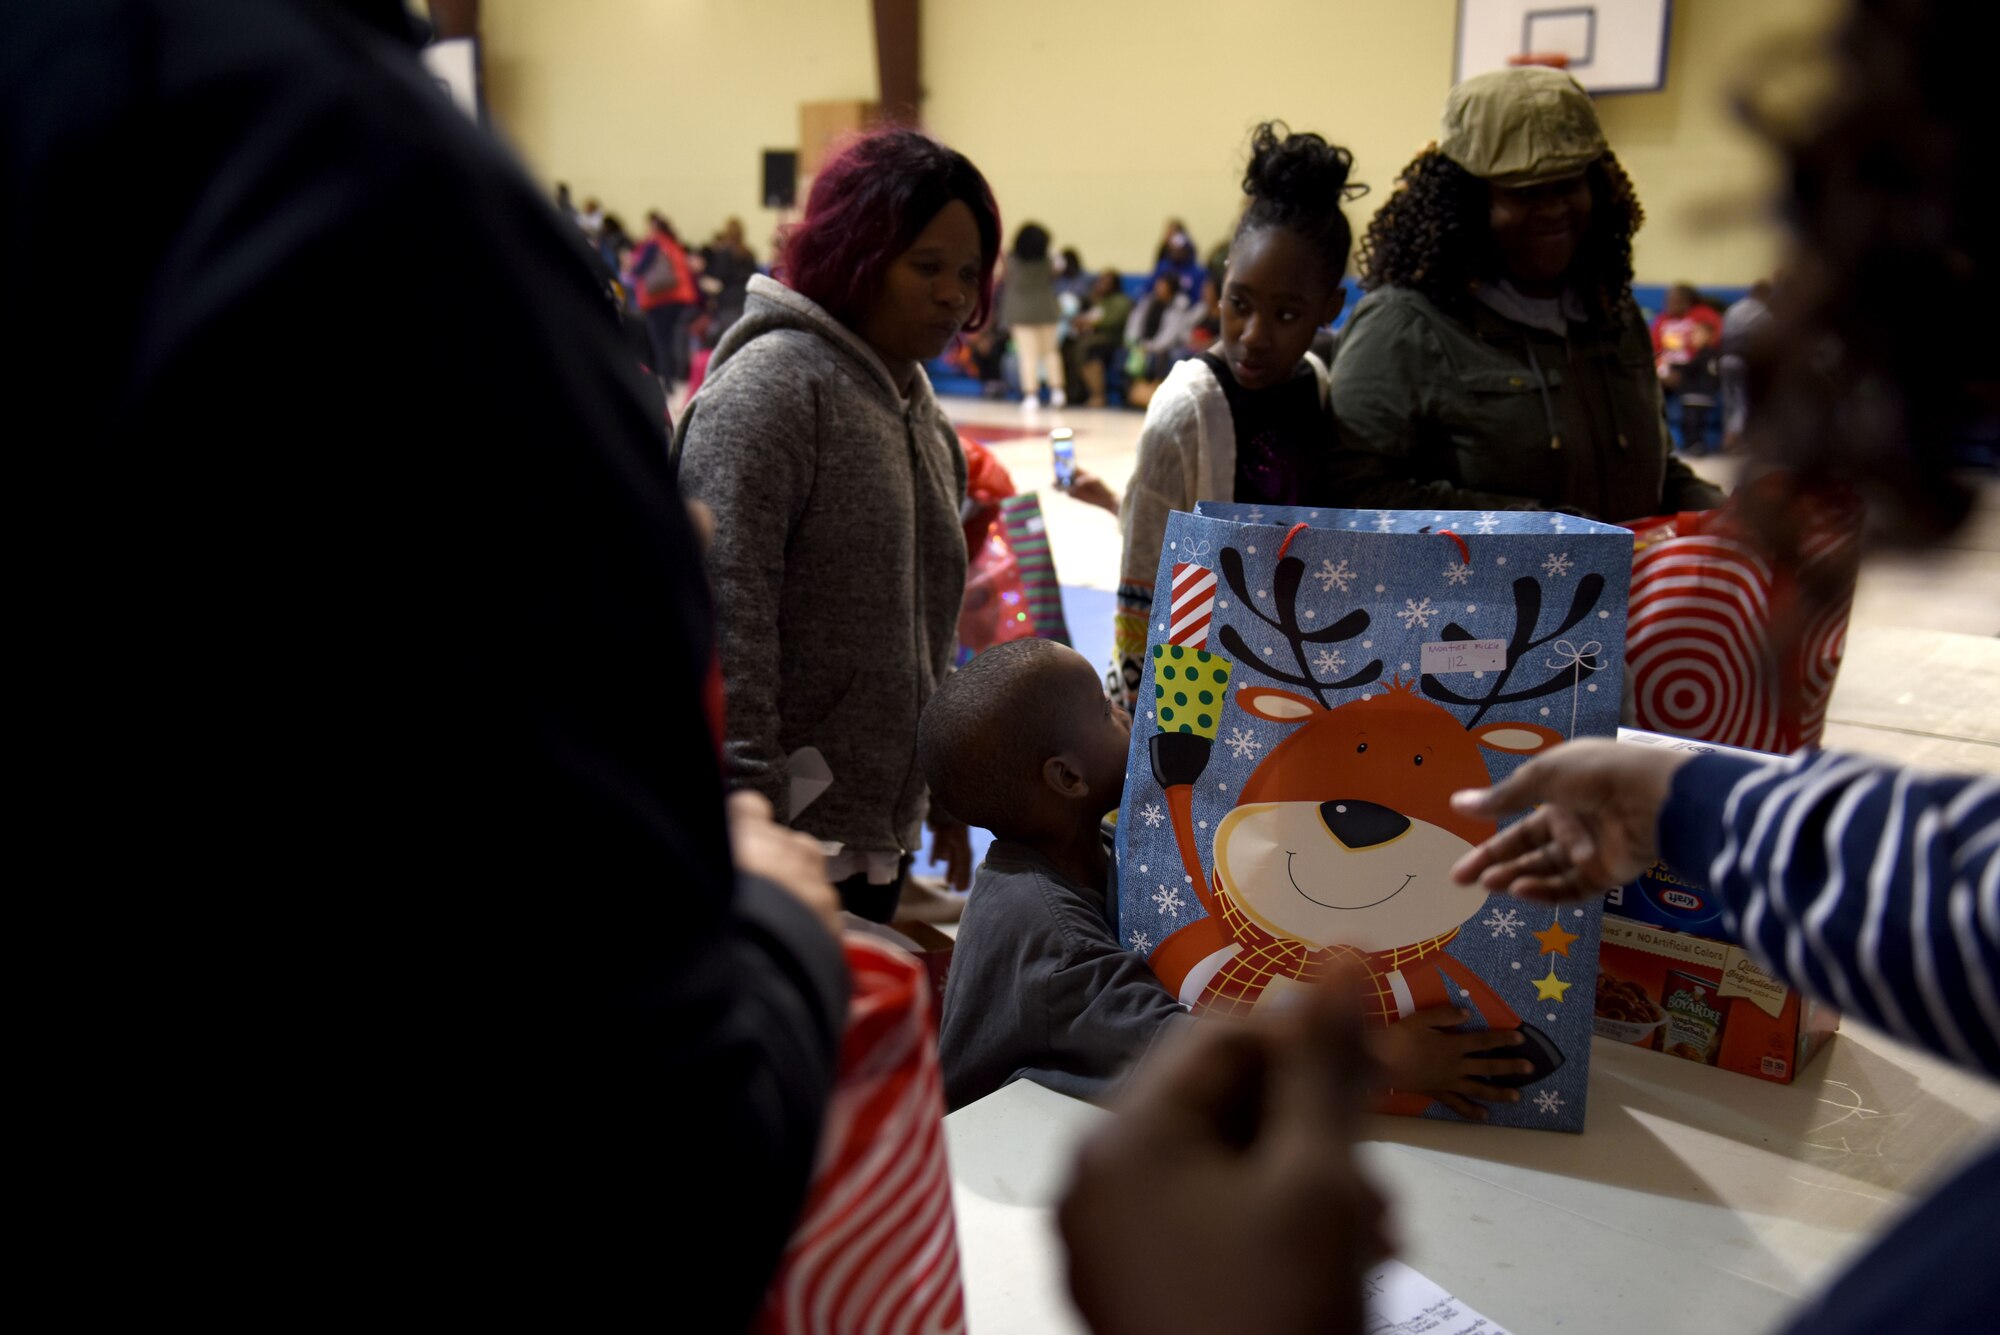 A young boy reaches for a present during Operation Santa held at the Aristotle Preparatory Academy, Dec. 16, 2017. Operation Santa is a local and annual event run by the Chapter 7 organization of the North Carolina Air National Guard. This year, the NCANG provided presents, lunch, music, face-painting, blankets, stuffed animals. They partnered with the local Target for food donations and a craft table, and inflatable castles through Garris and Wilson Entertainment. (U.S. Air National Guard photo by Staff. Sgt. Laura J. Montgomery)